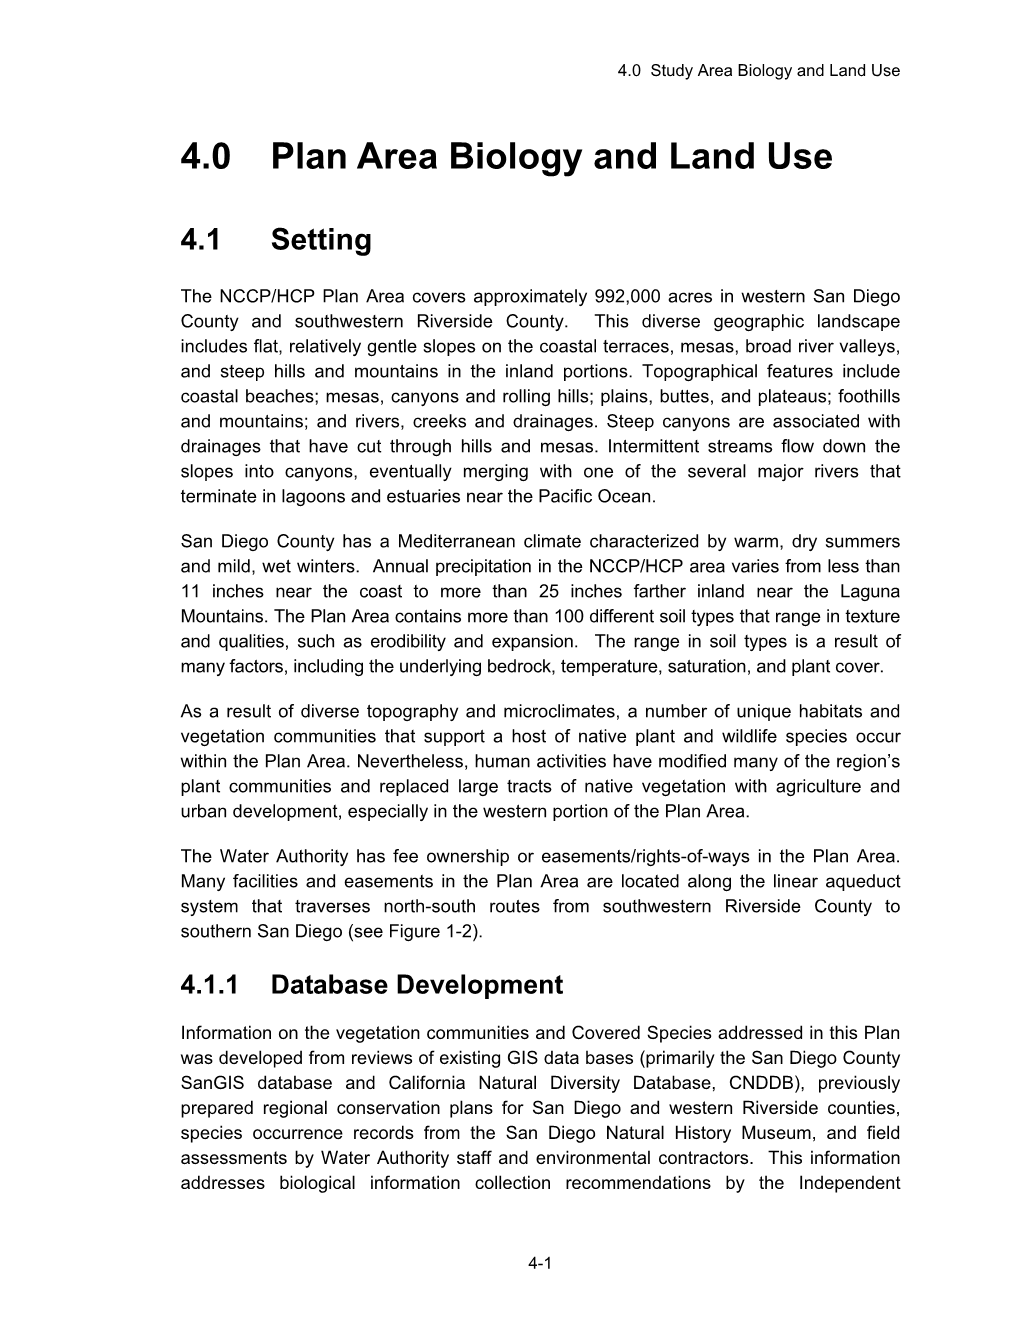 4.0 Plan Area Biology and Land Use